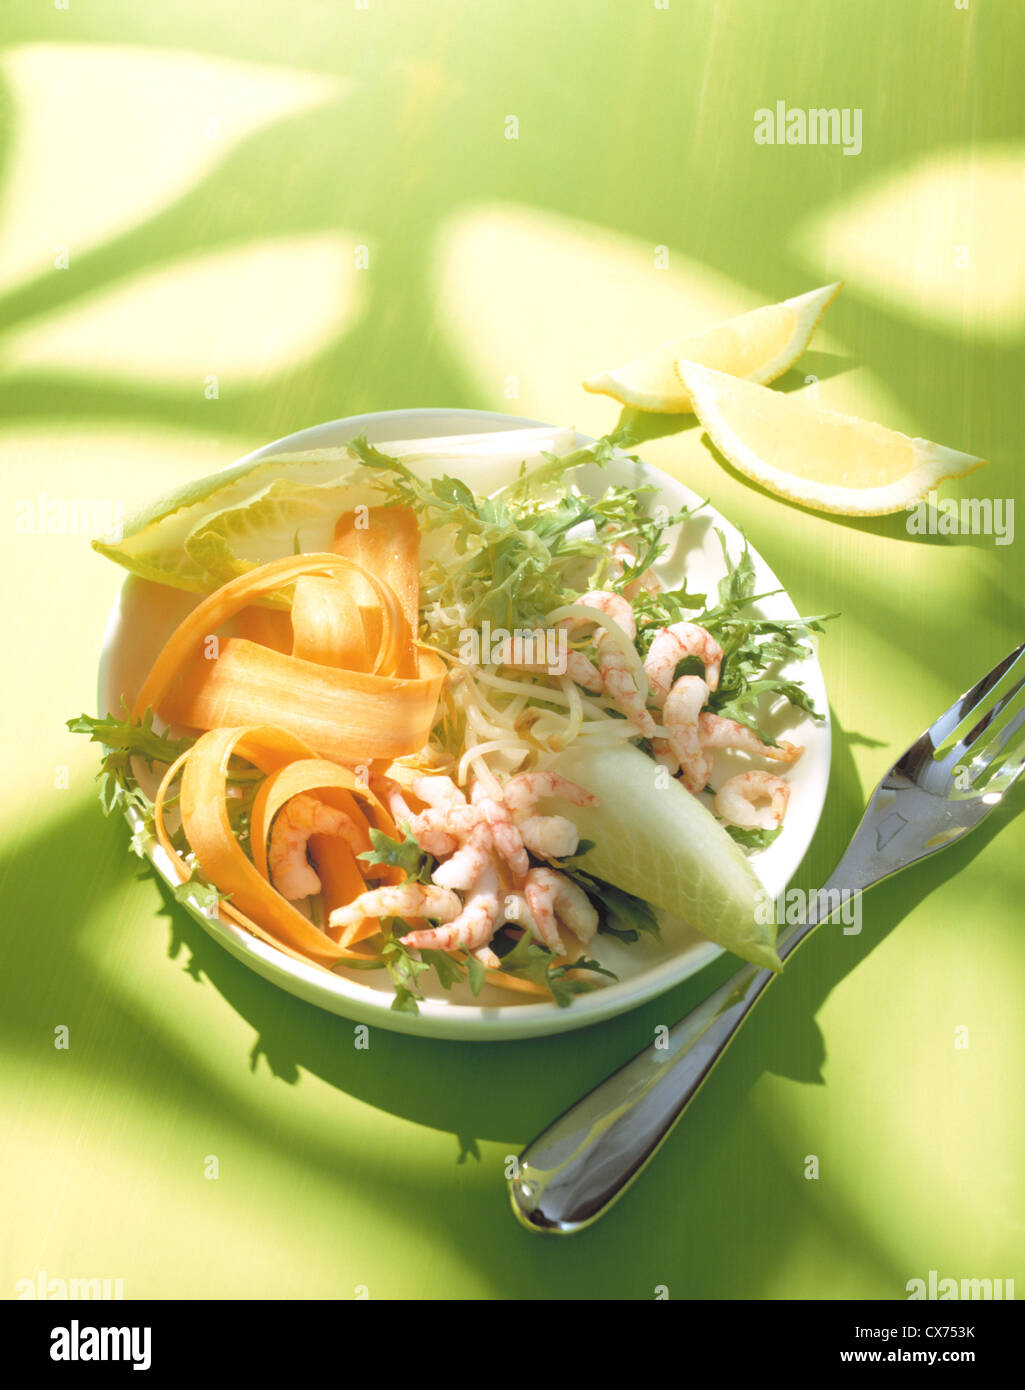 Lettuce with crabs, carrots and sprouts Stock Photo - Alamy